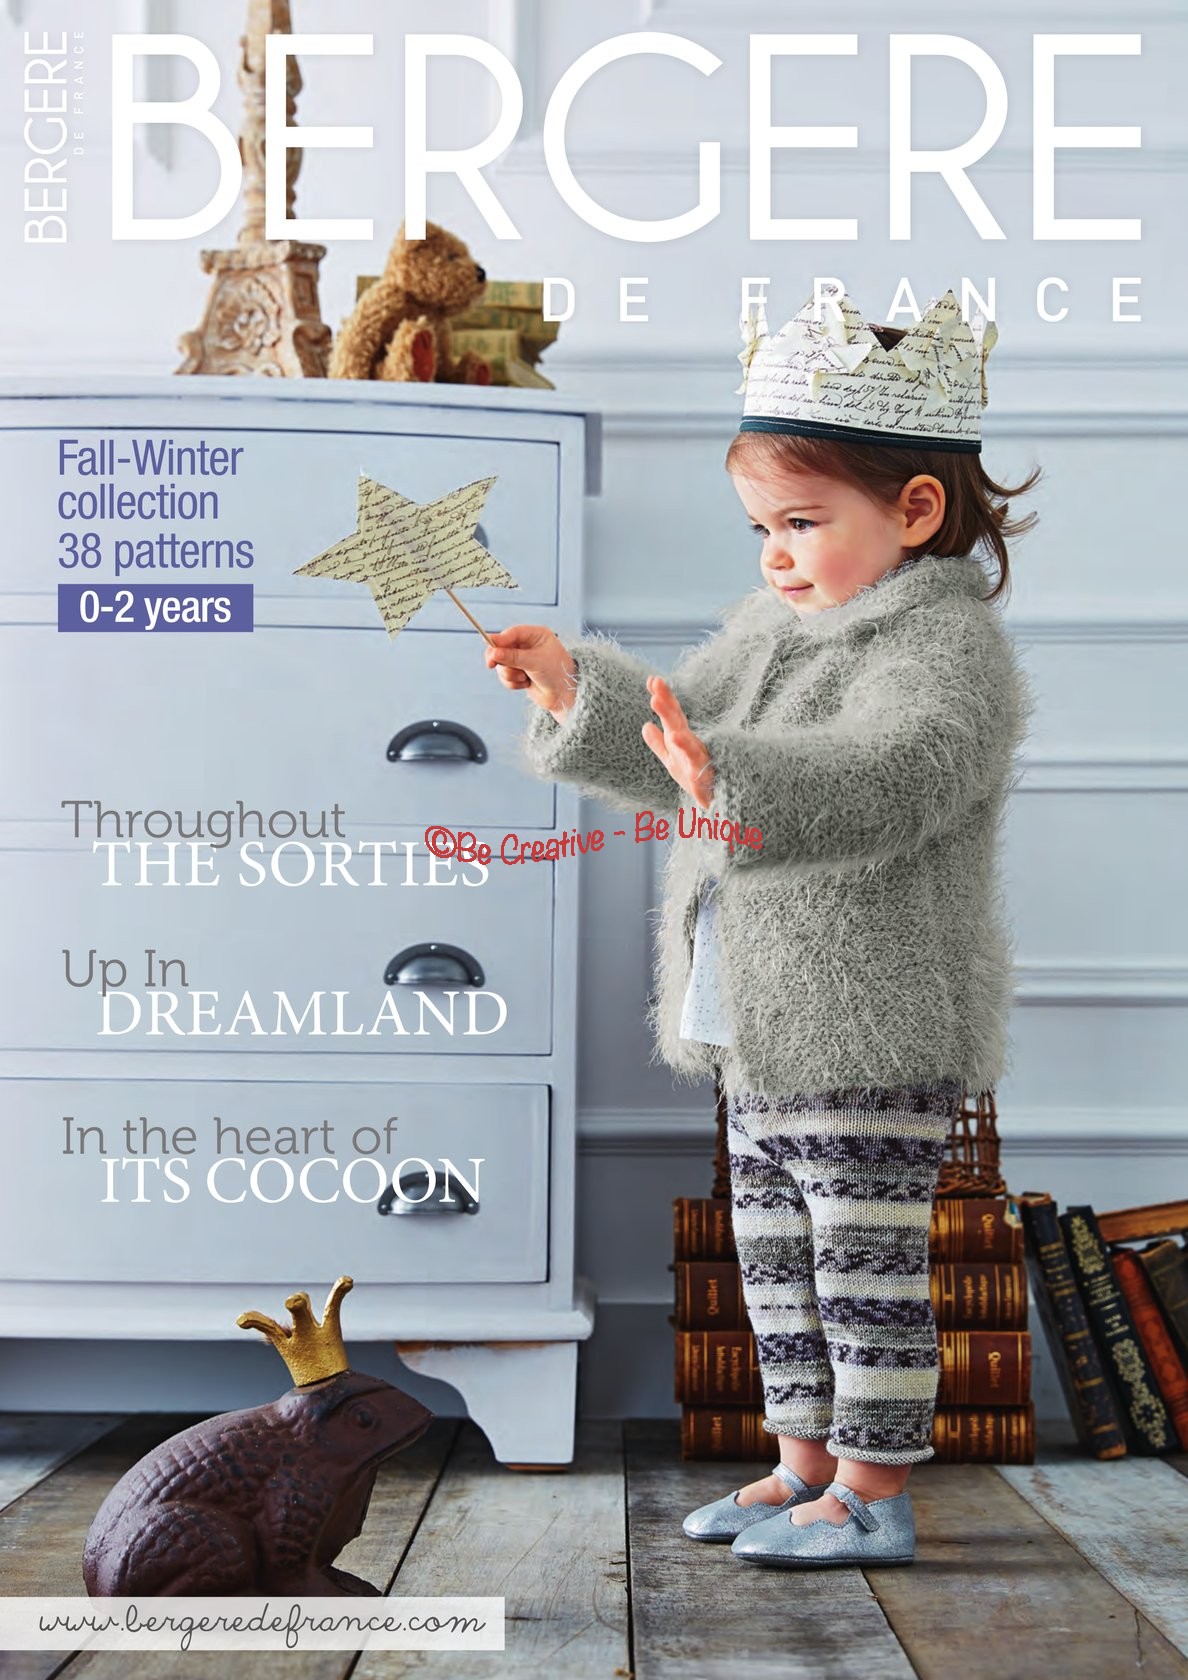 Bergere de France - Mag 176 - Fall-Winter Collection - Patterns in English